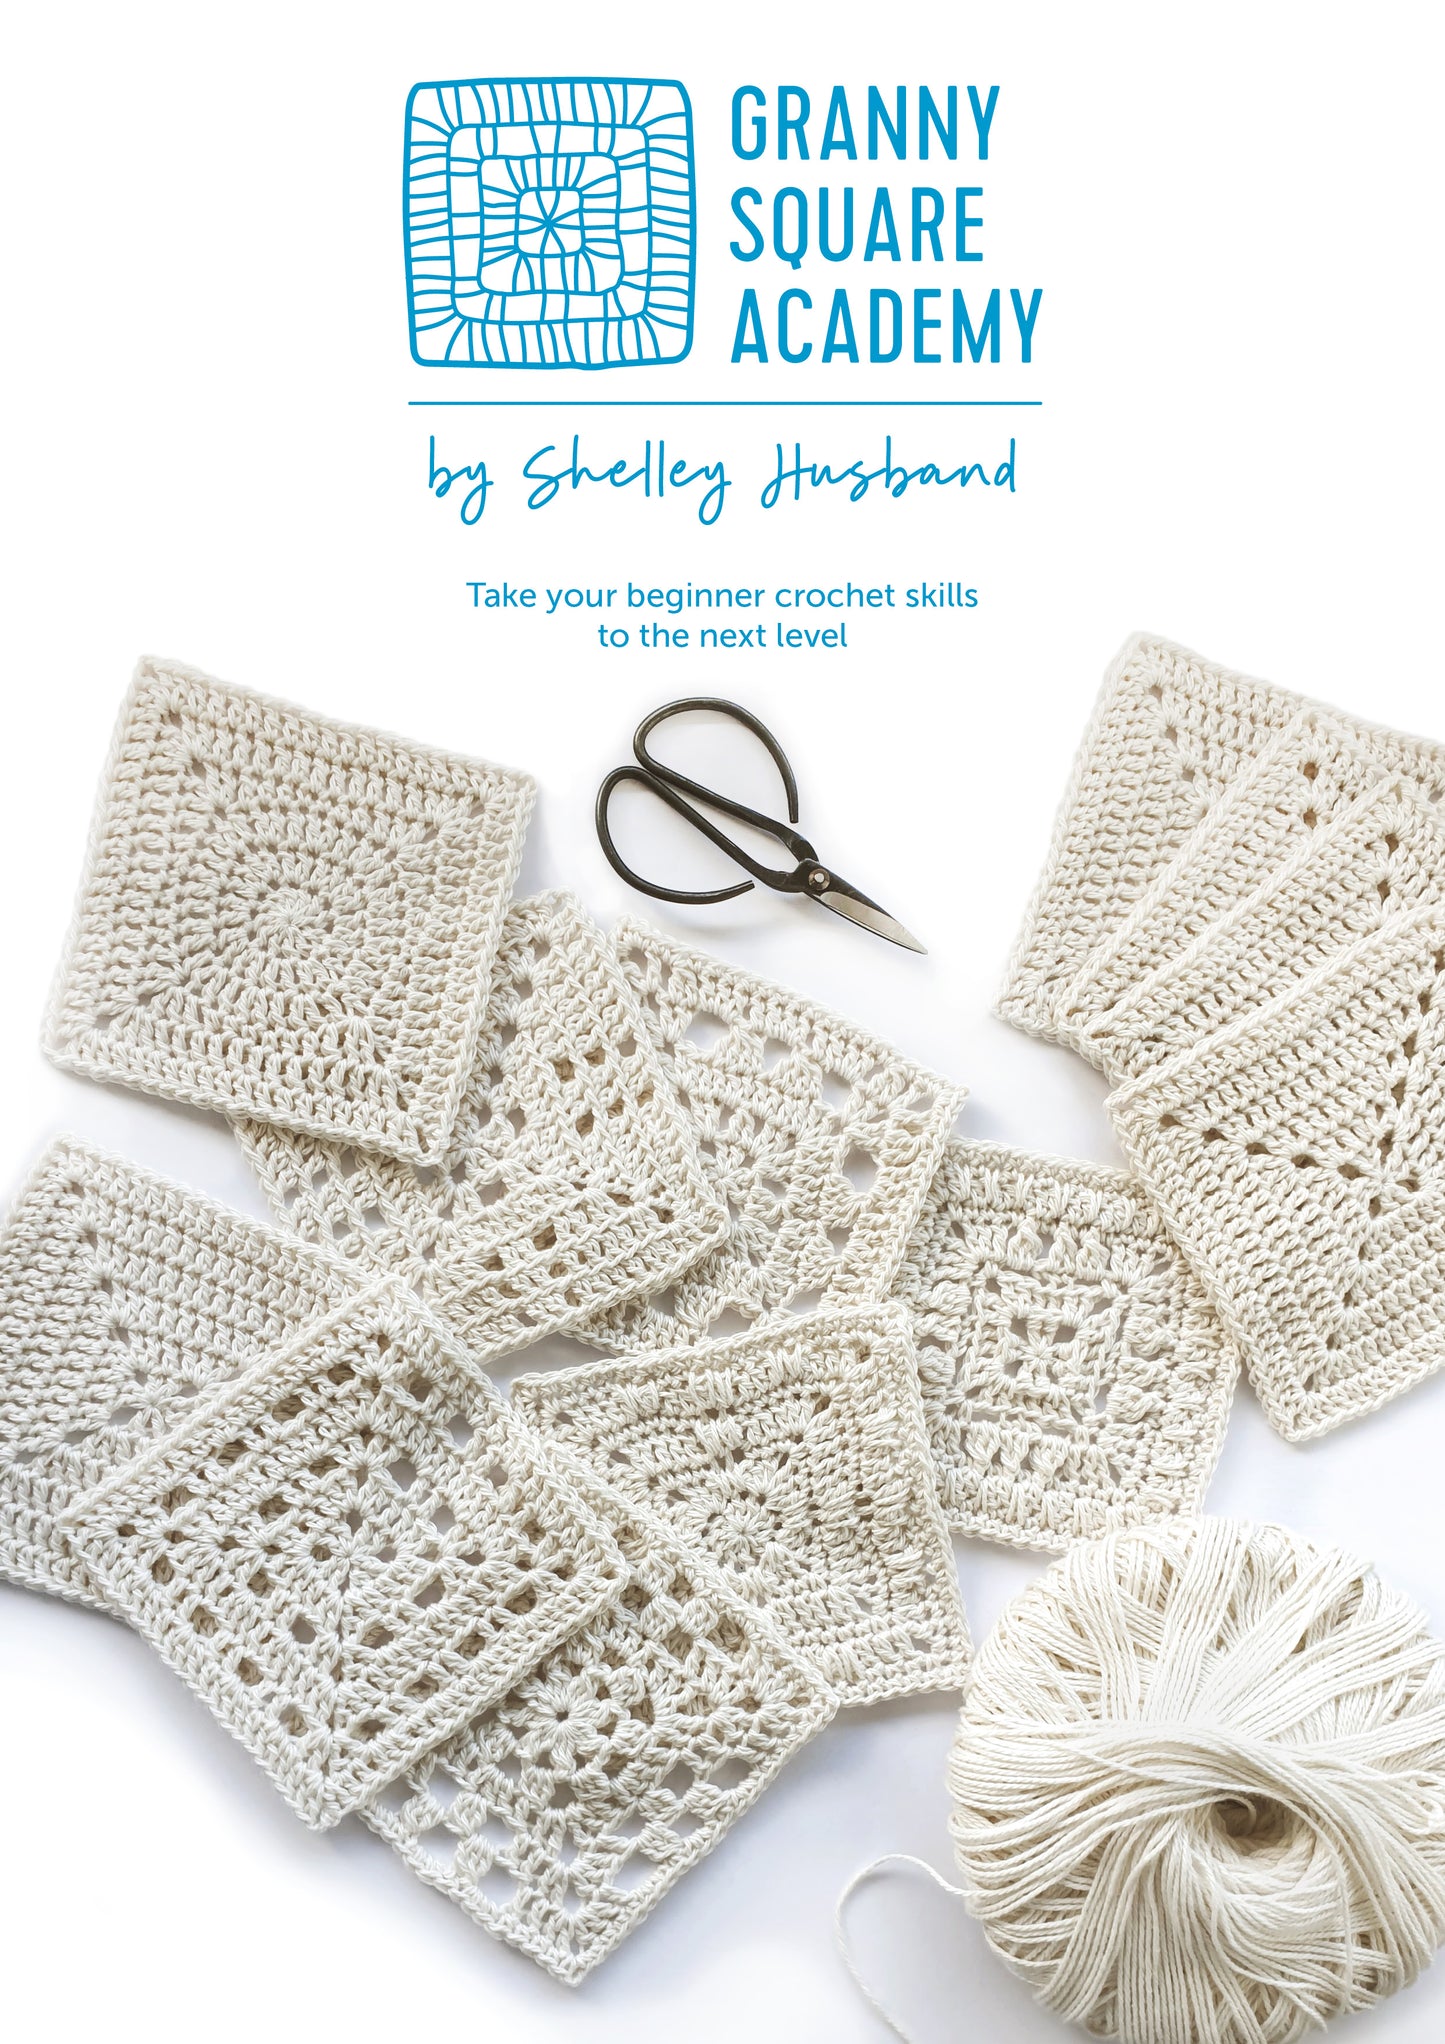 Granny Square Academy book by Shelley Husband full cover "Take your beginner crochet skills to the next level"